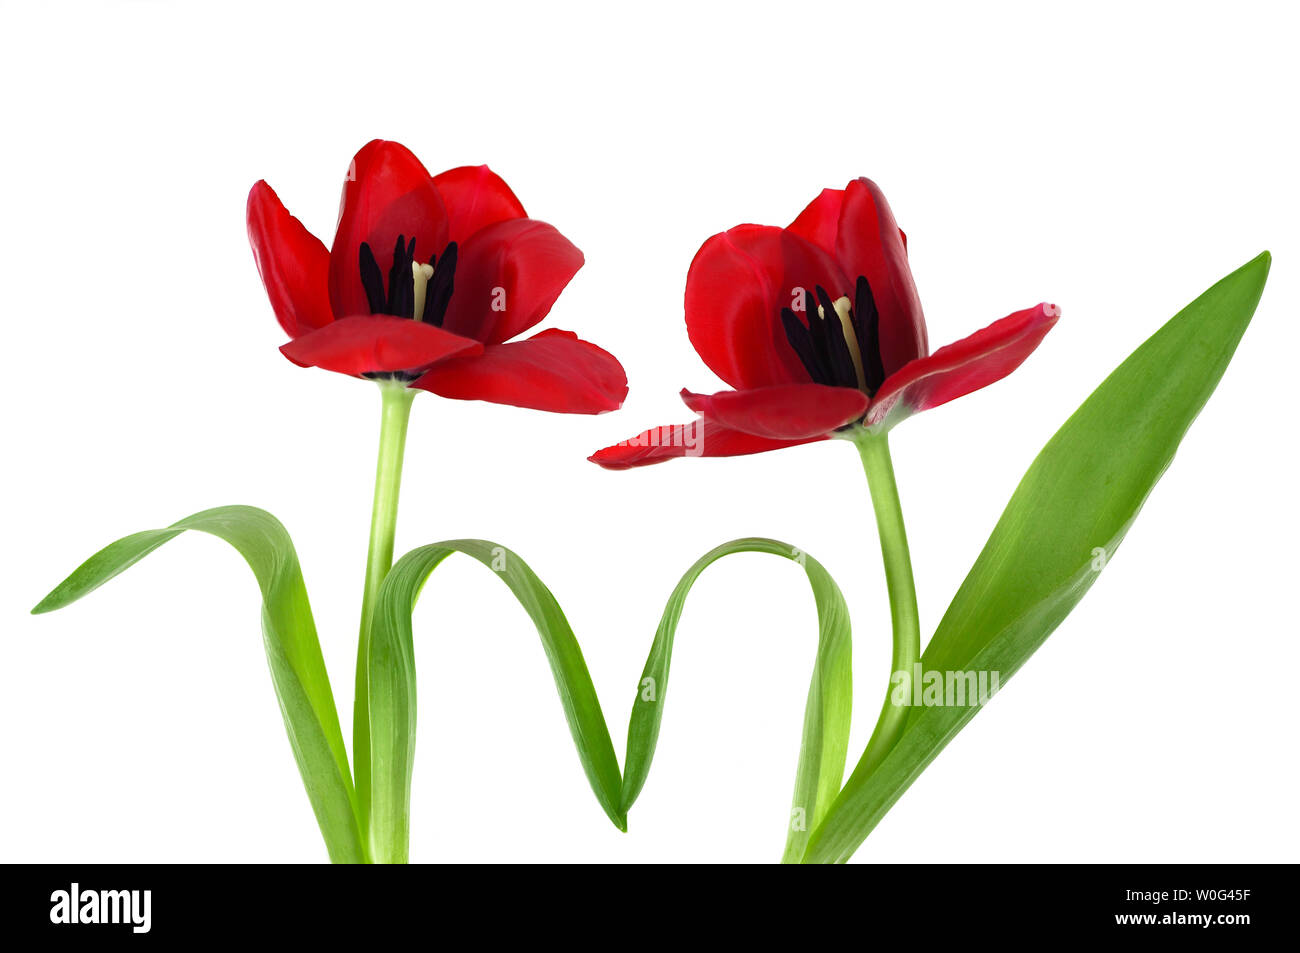 Two red tulip flowers holding hands isolated on white background Stock Photo